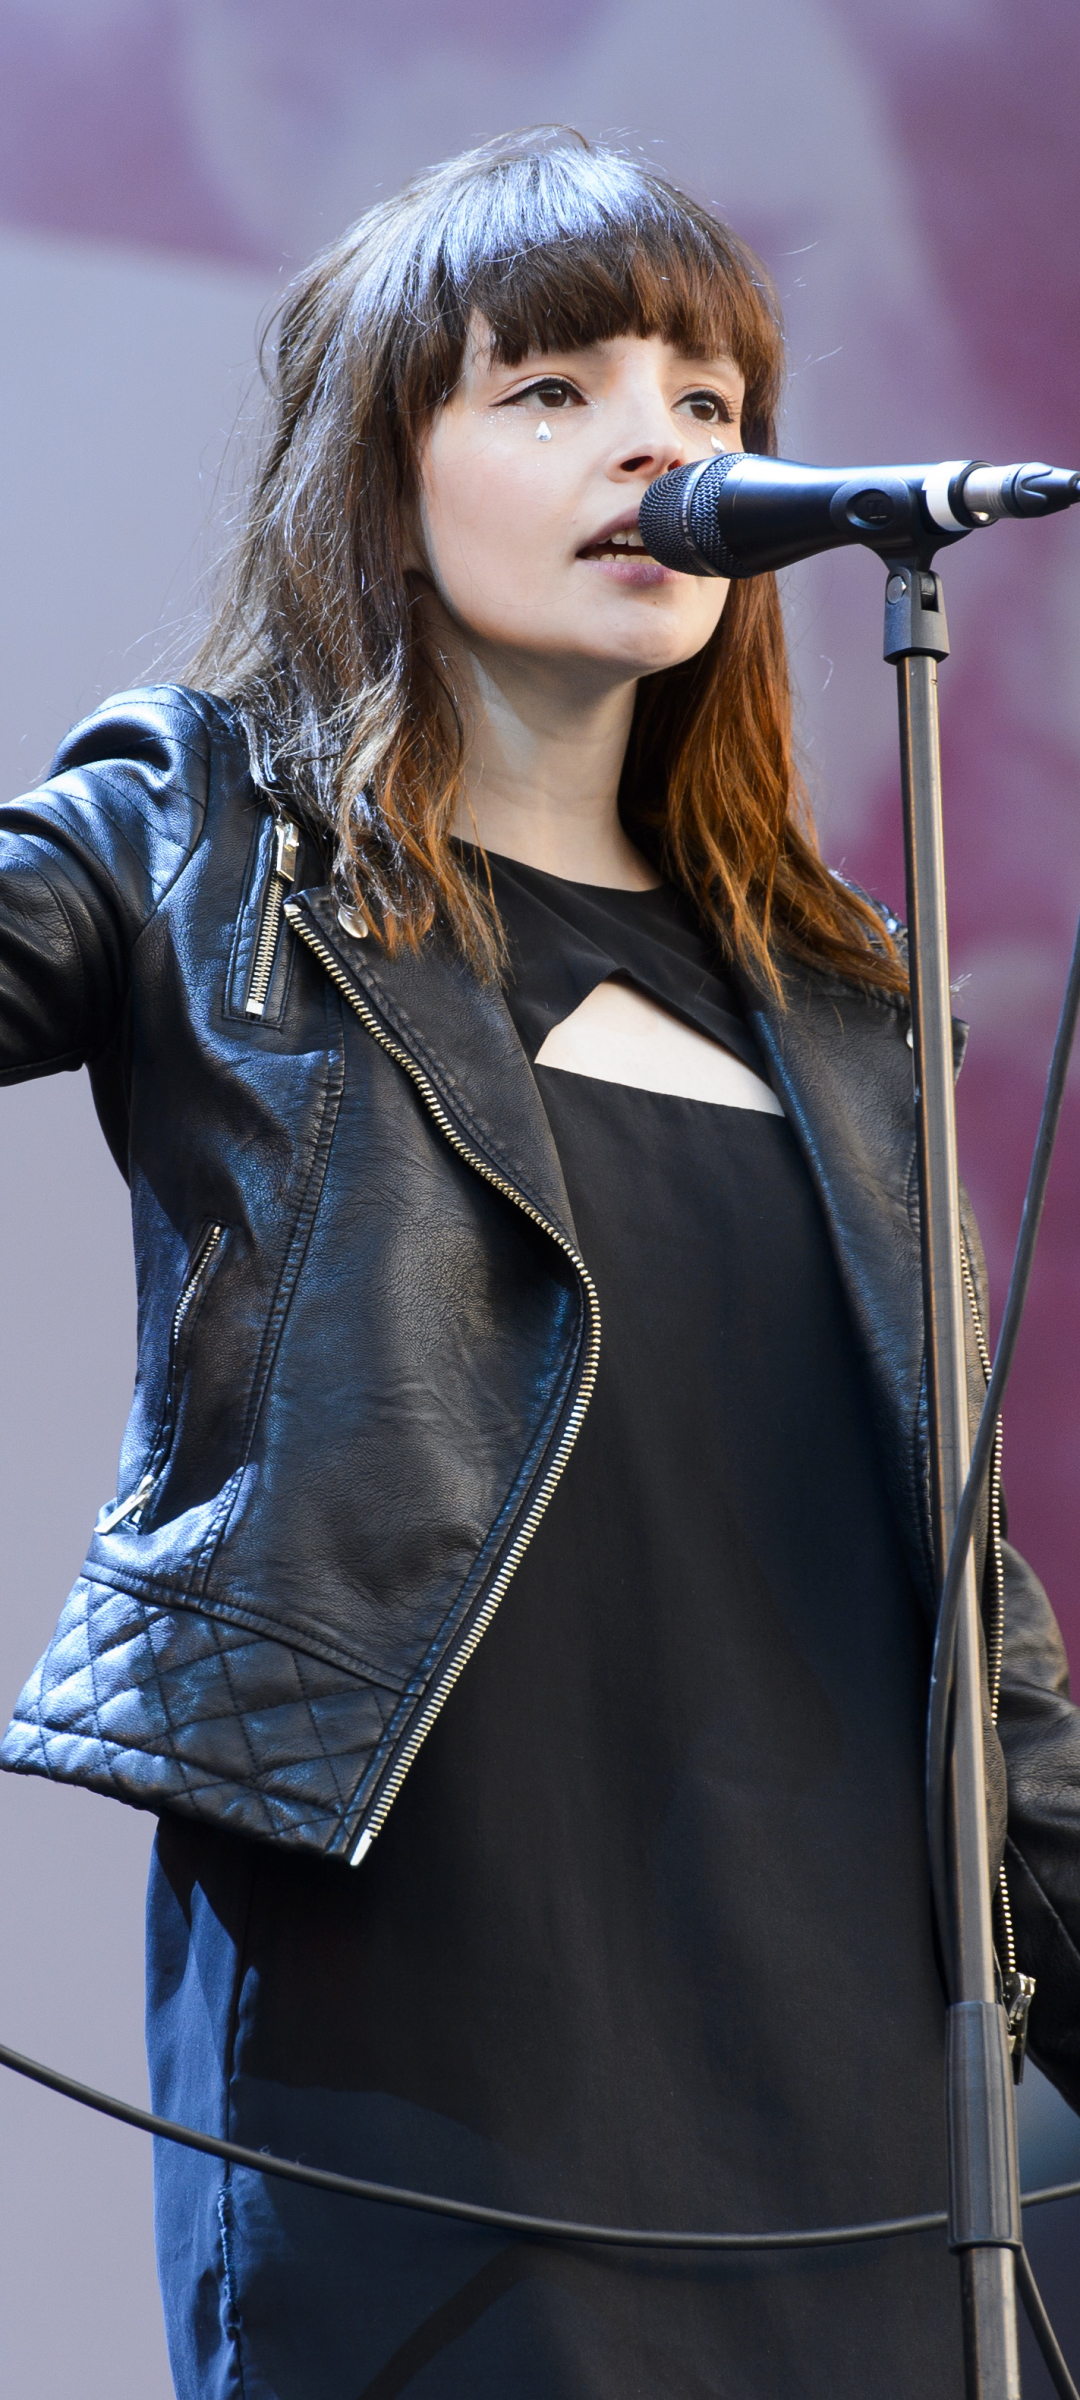 music, chvrches cell phone wallpapers